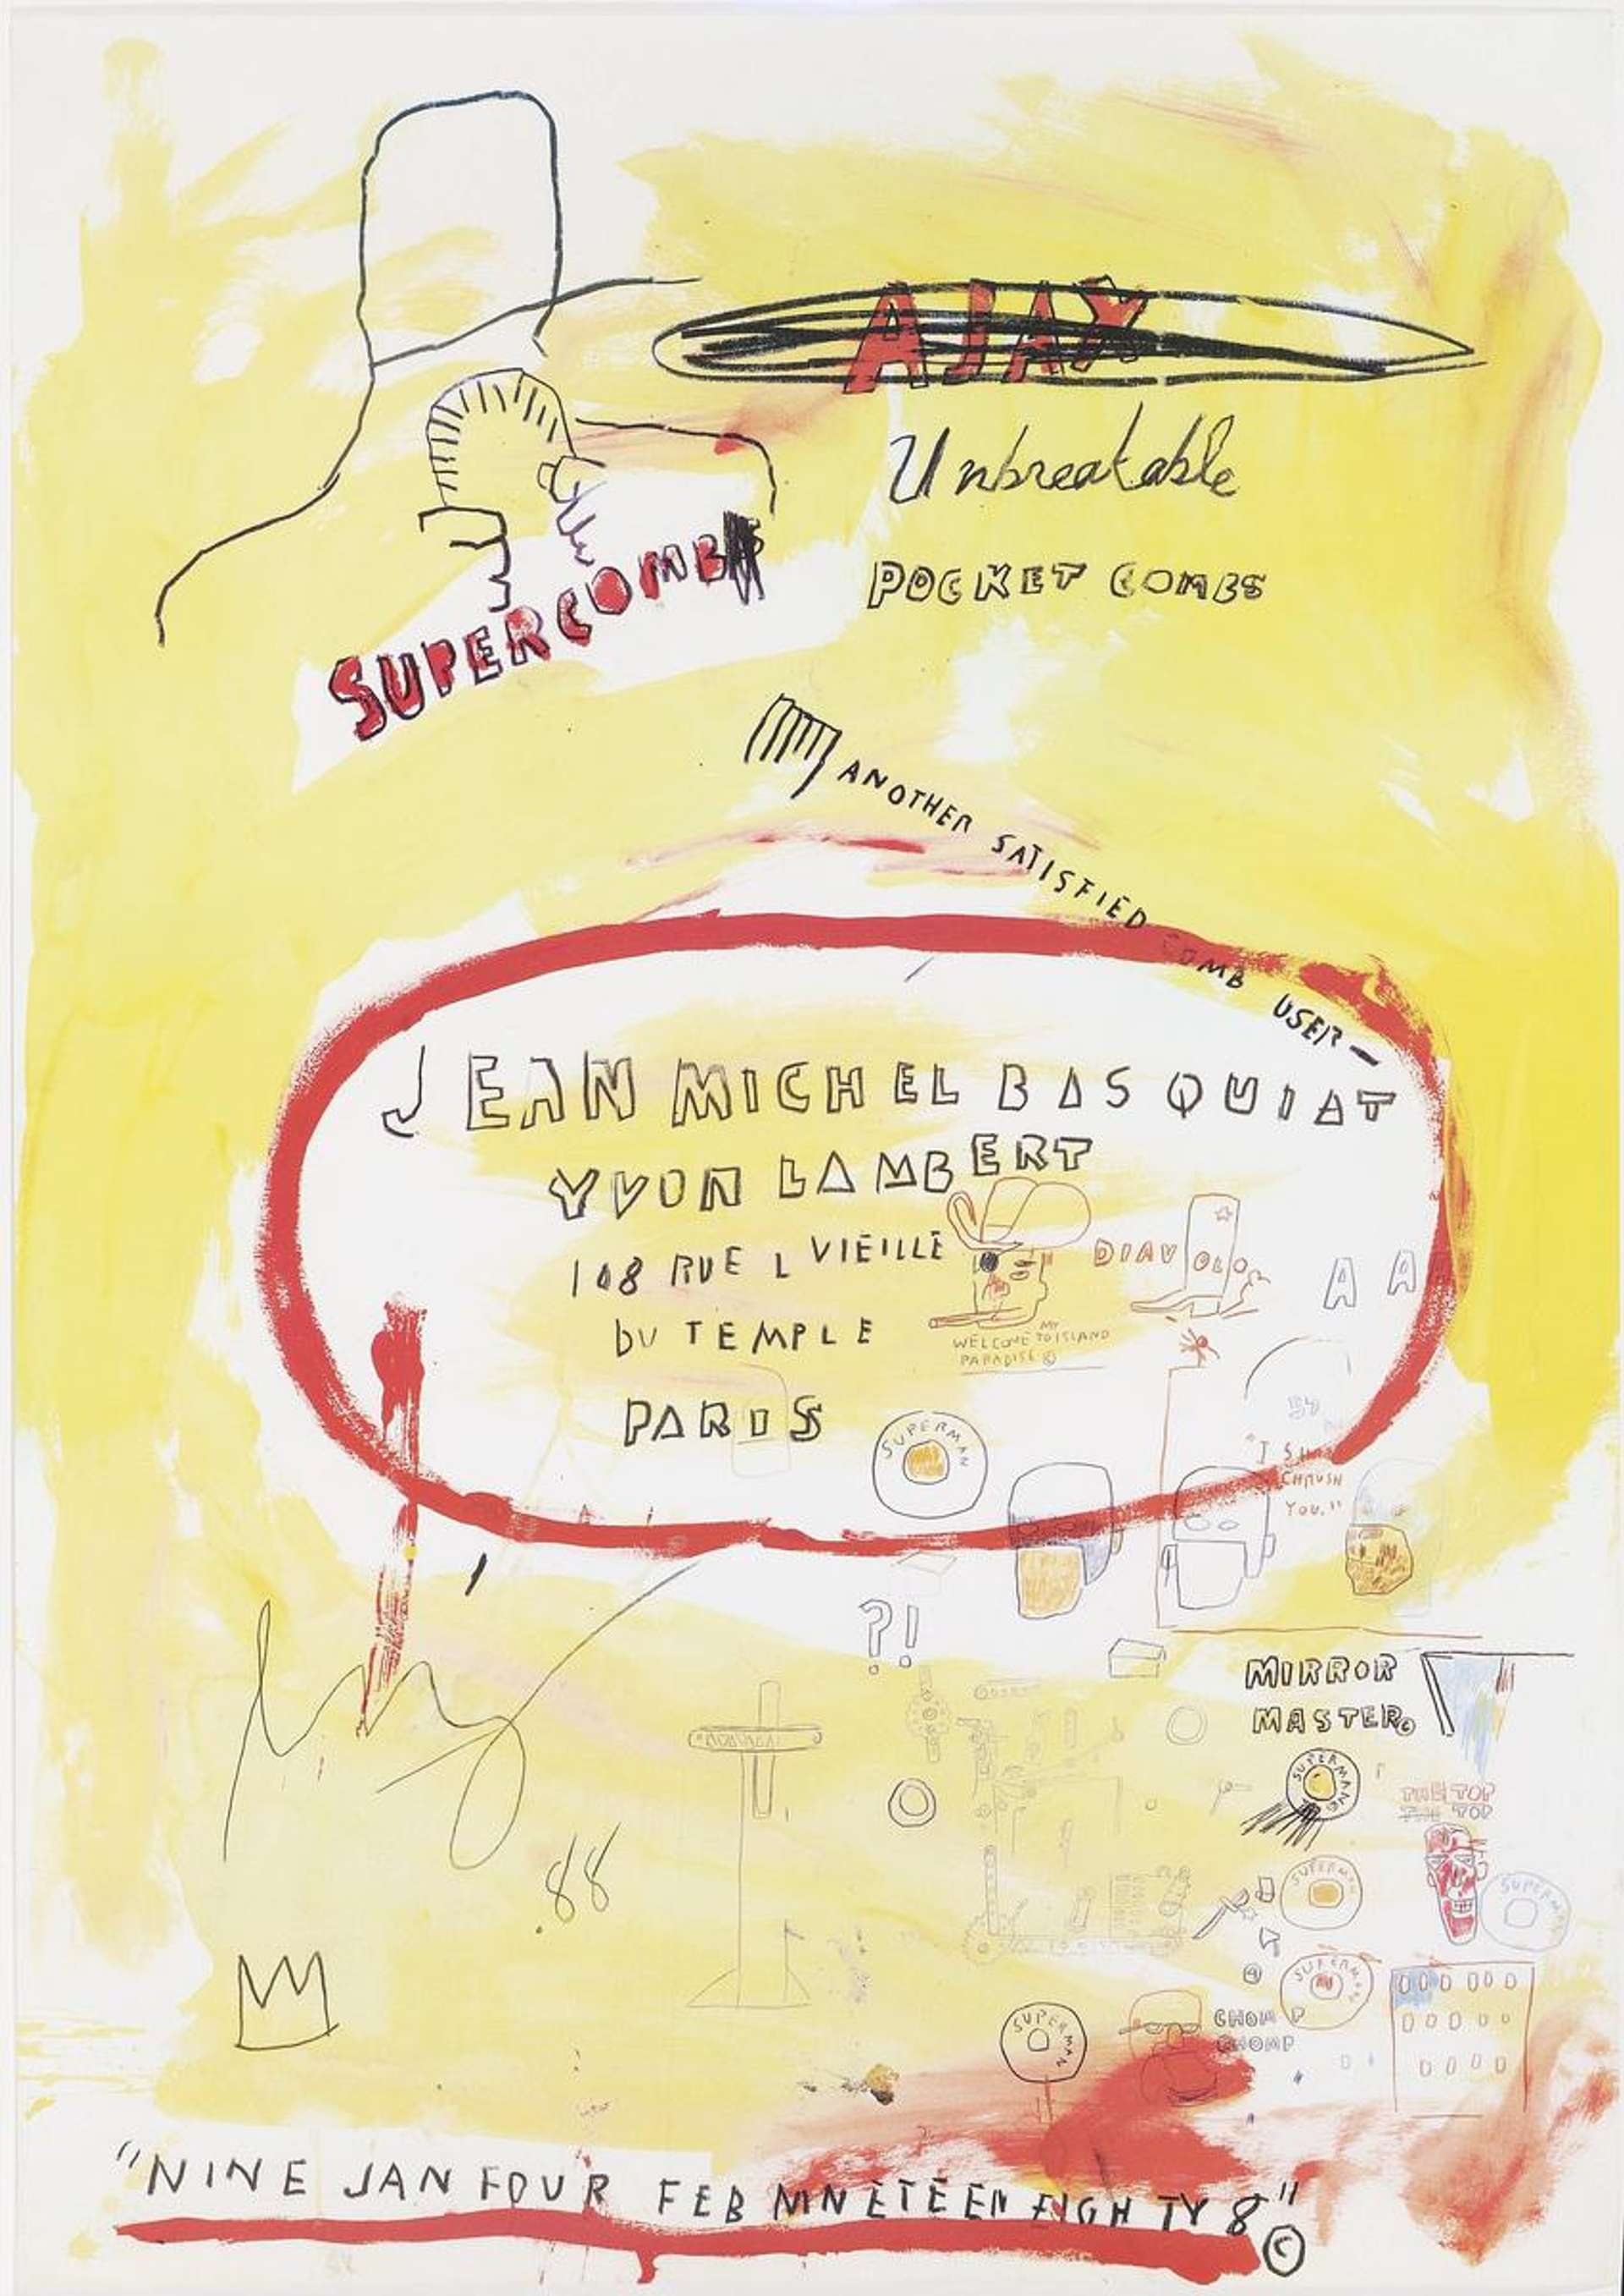 The outline of a man is depicted holding a ‘supercomb’, which is described as an ‘unbreakable pocket comb’. The chaotic layering of text, paint and sketches in the piece, however, contrast strongly against the tightly controlled visual presentation which defines the advertising press. The work is done against a light yellow background.